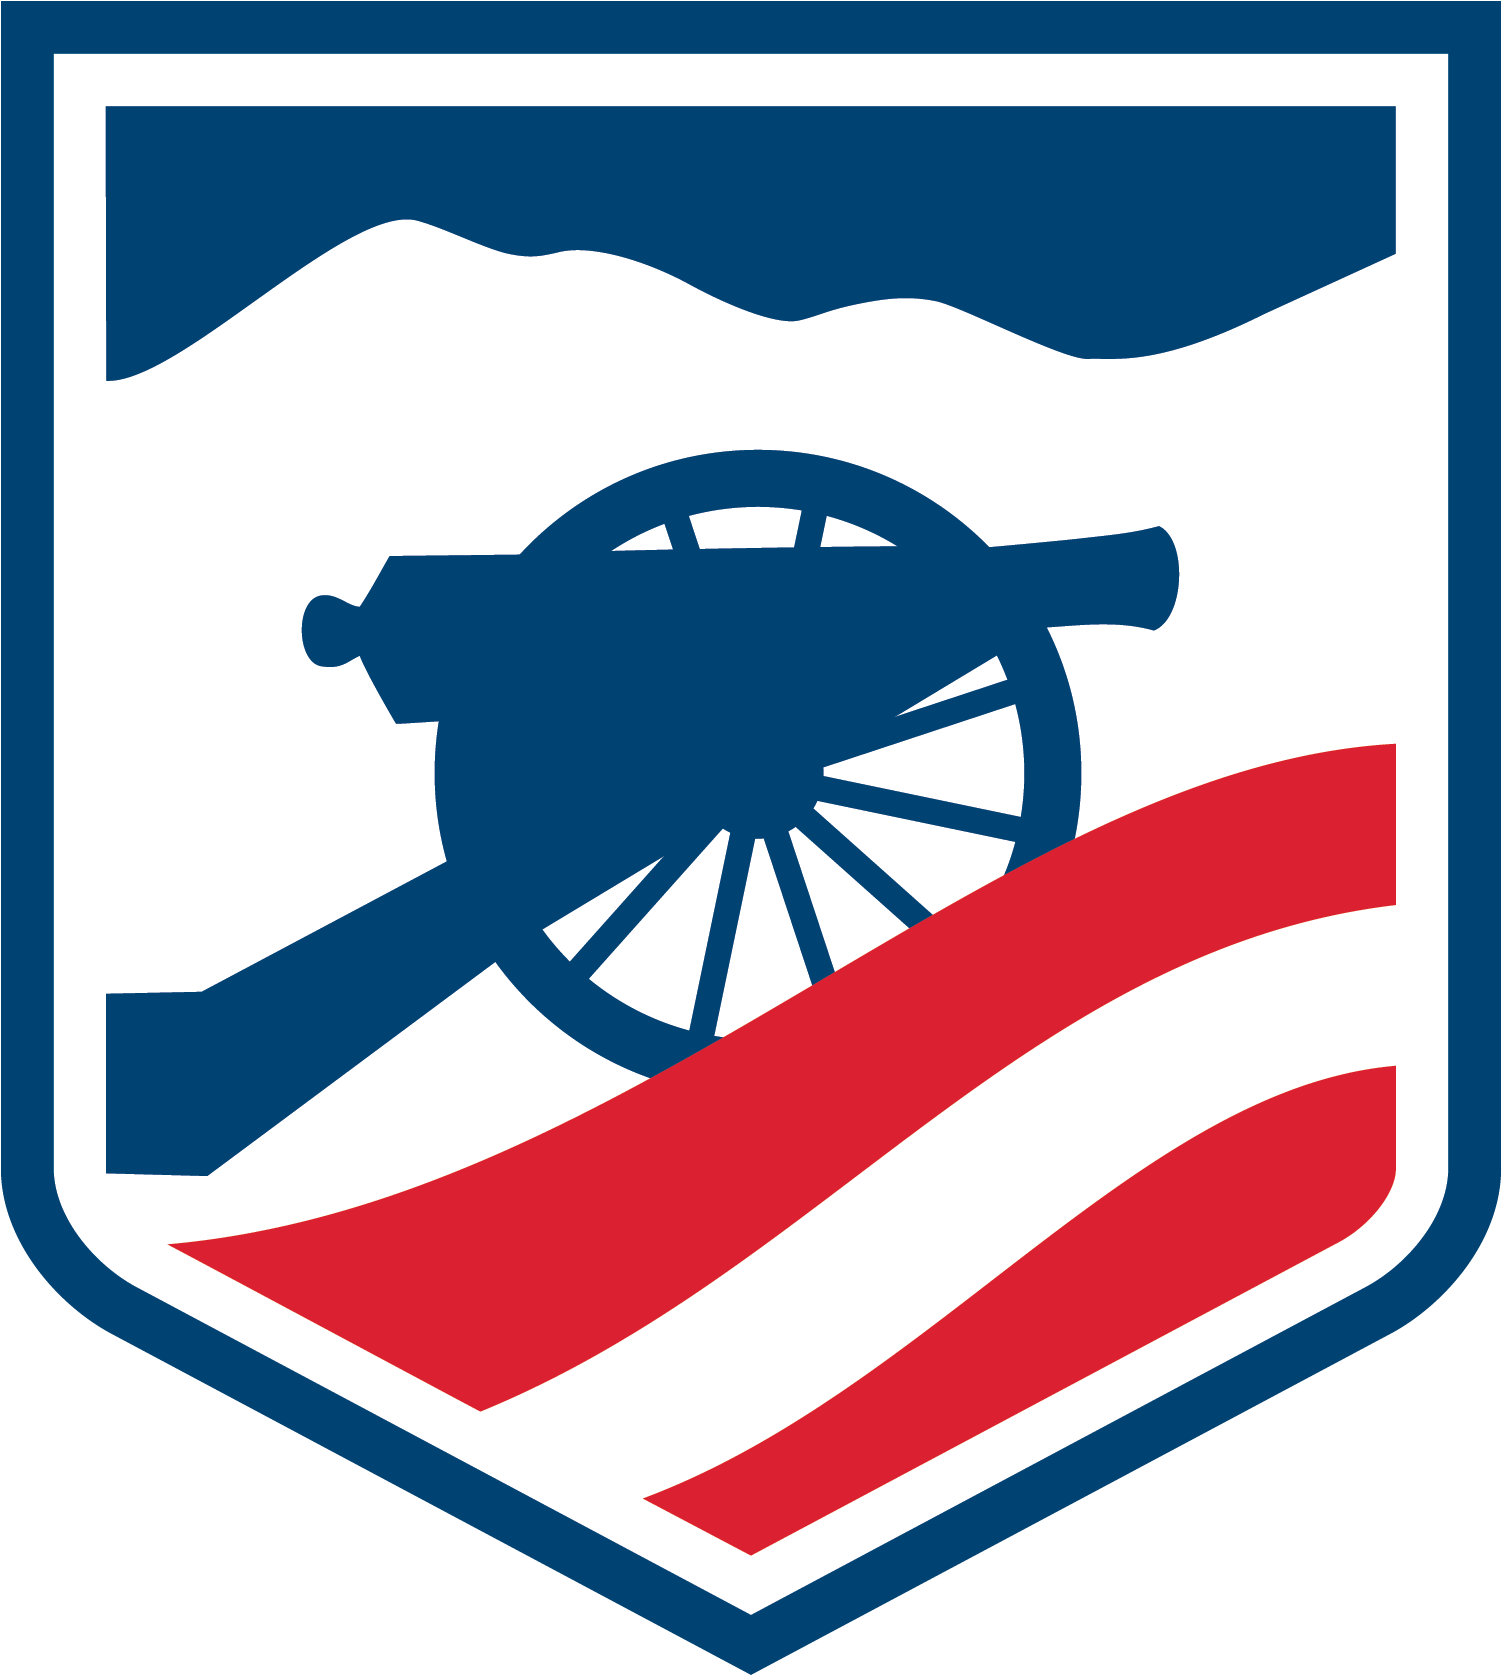 logo with a cannon on a field of red and white stripes against a white and blue background